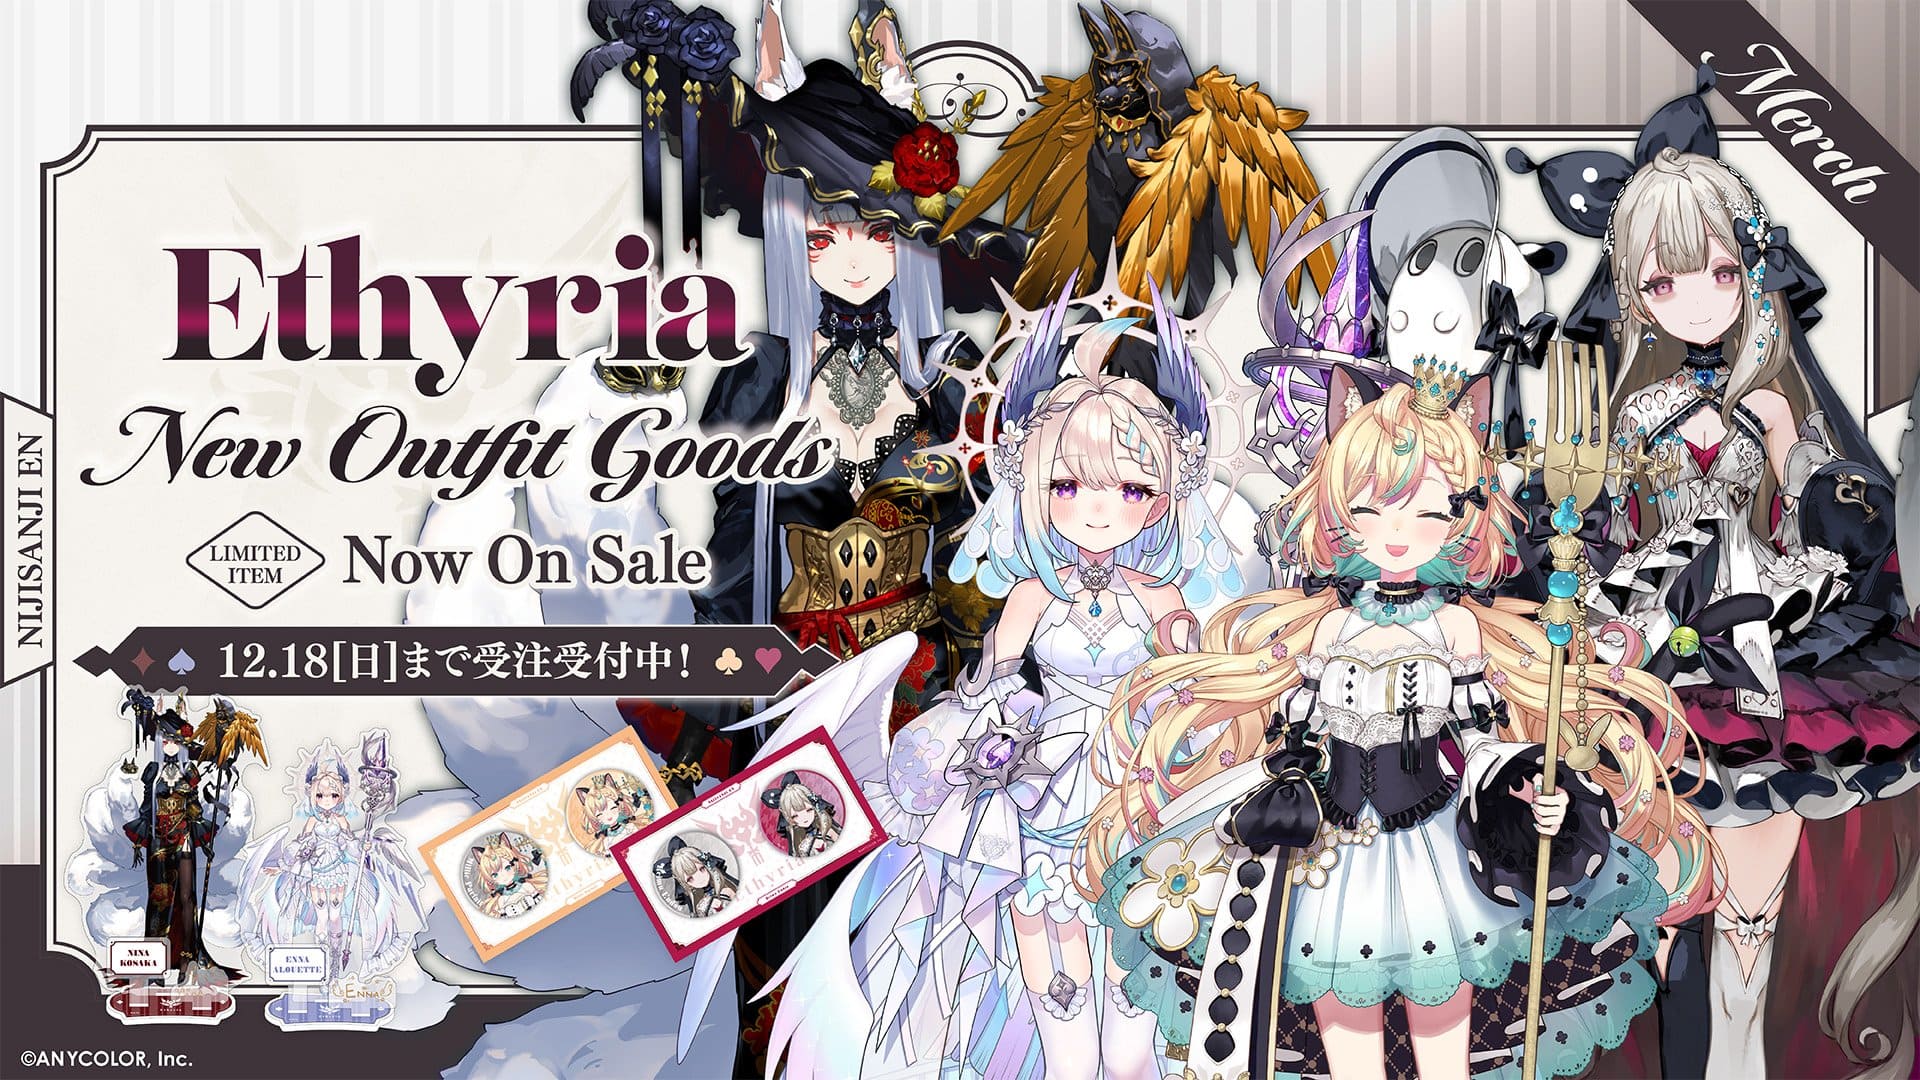 Ethyria New Outfit Goods